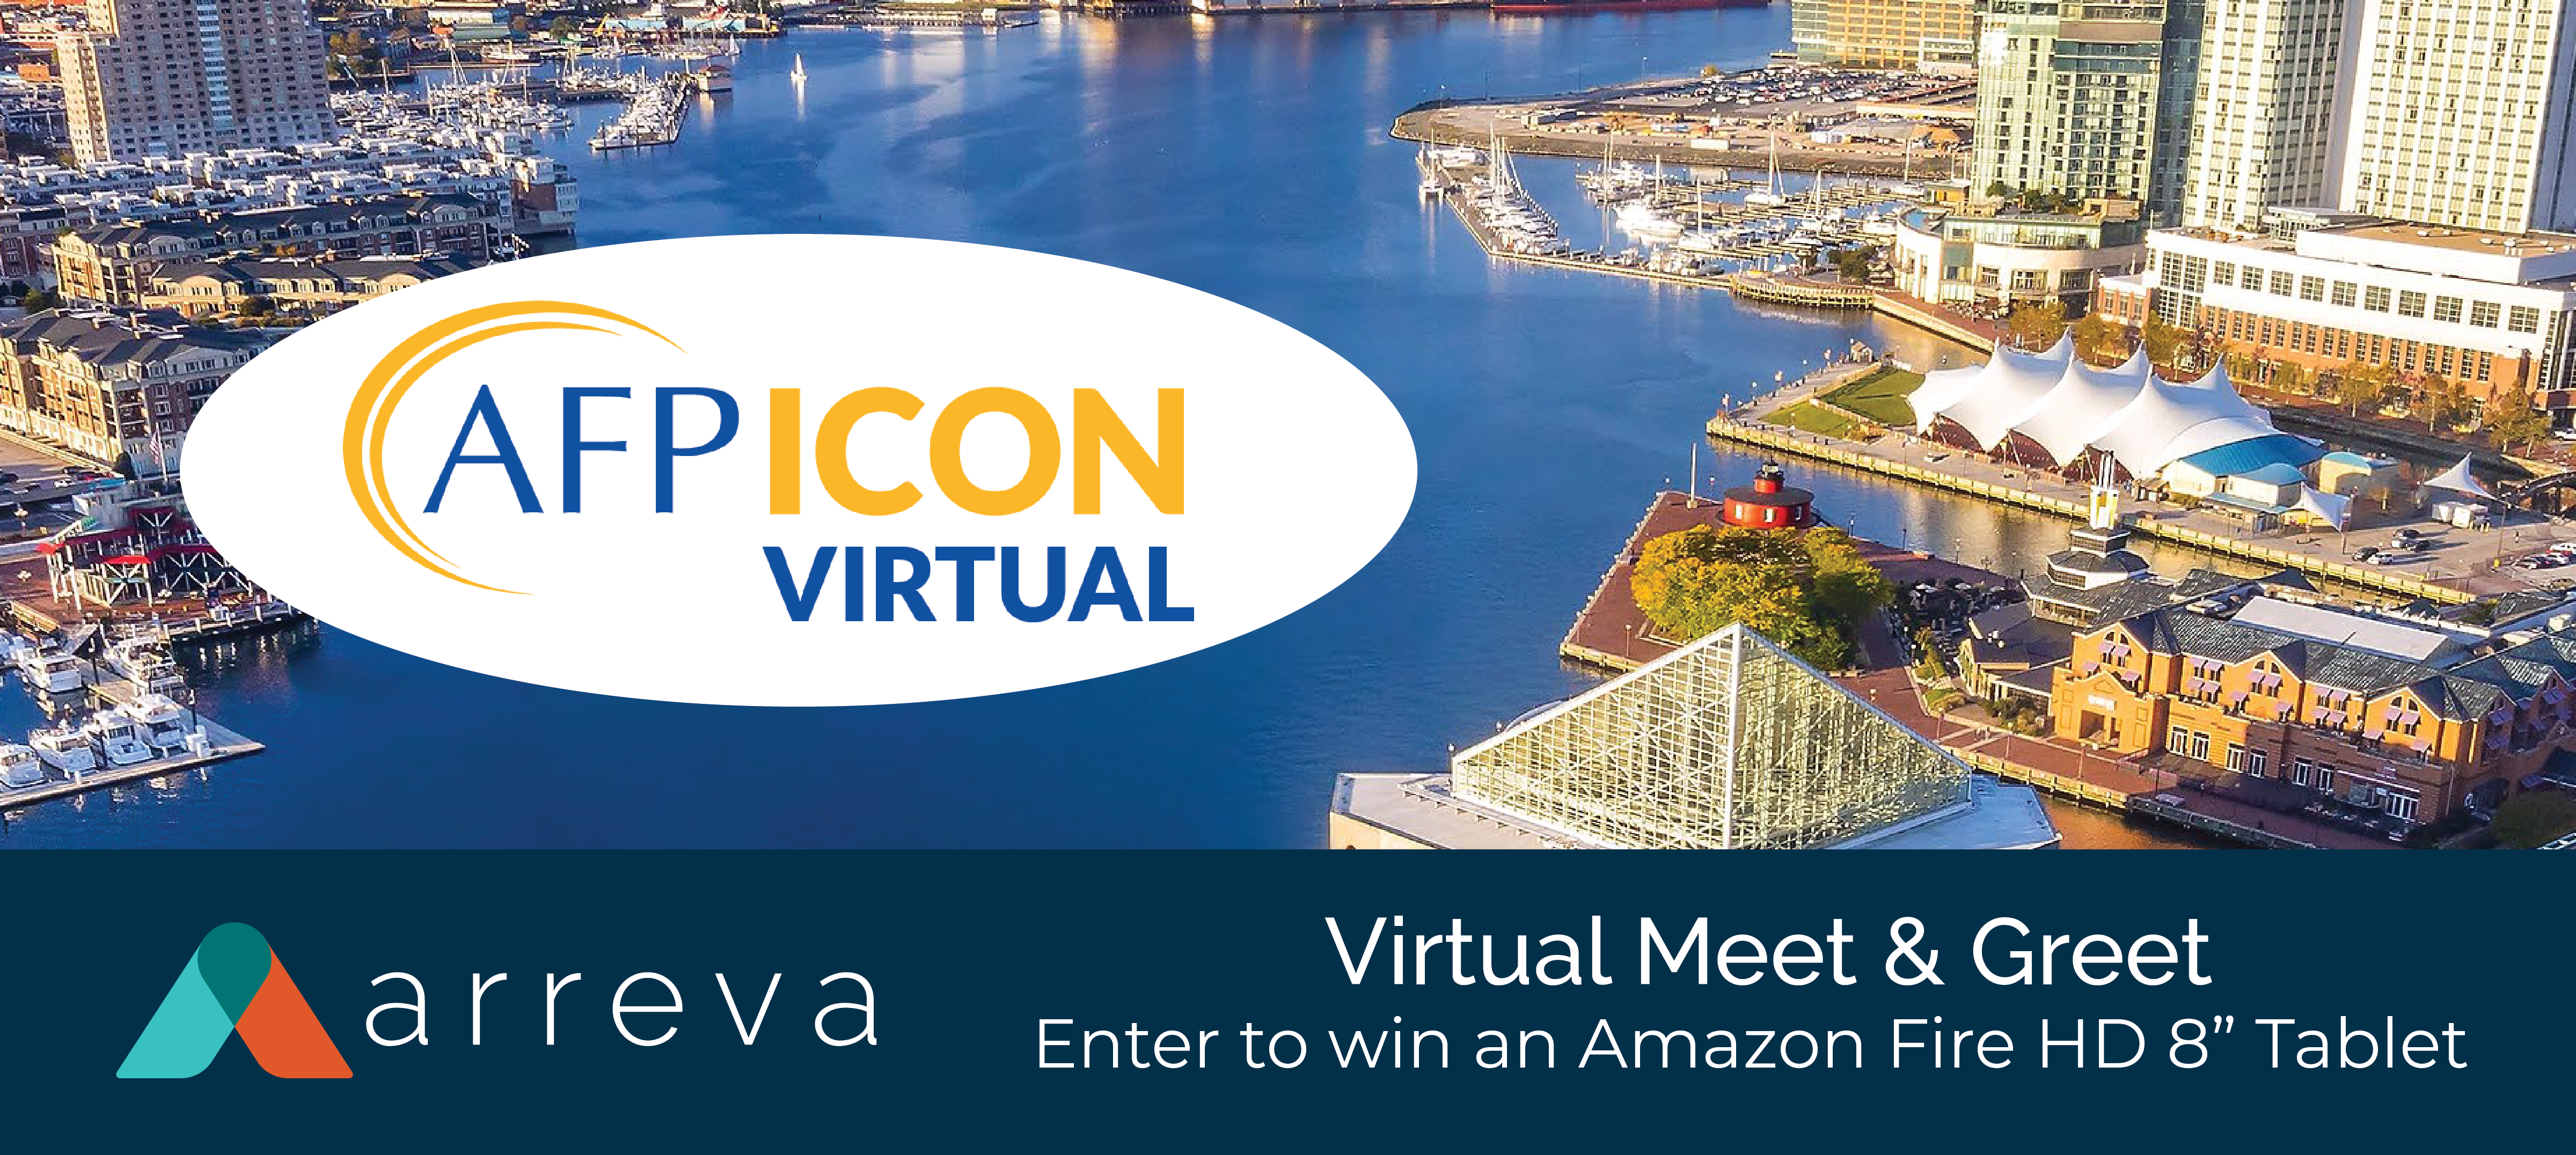 Visit us at AFP Icon Virtual and Enter to Win Great Prizes